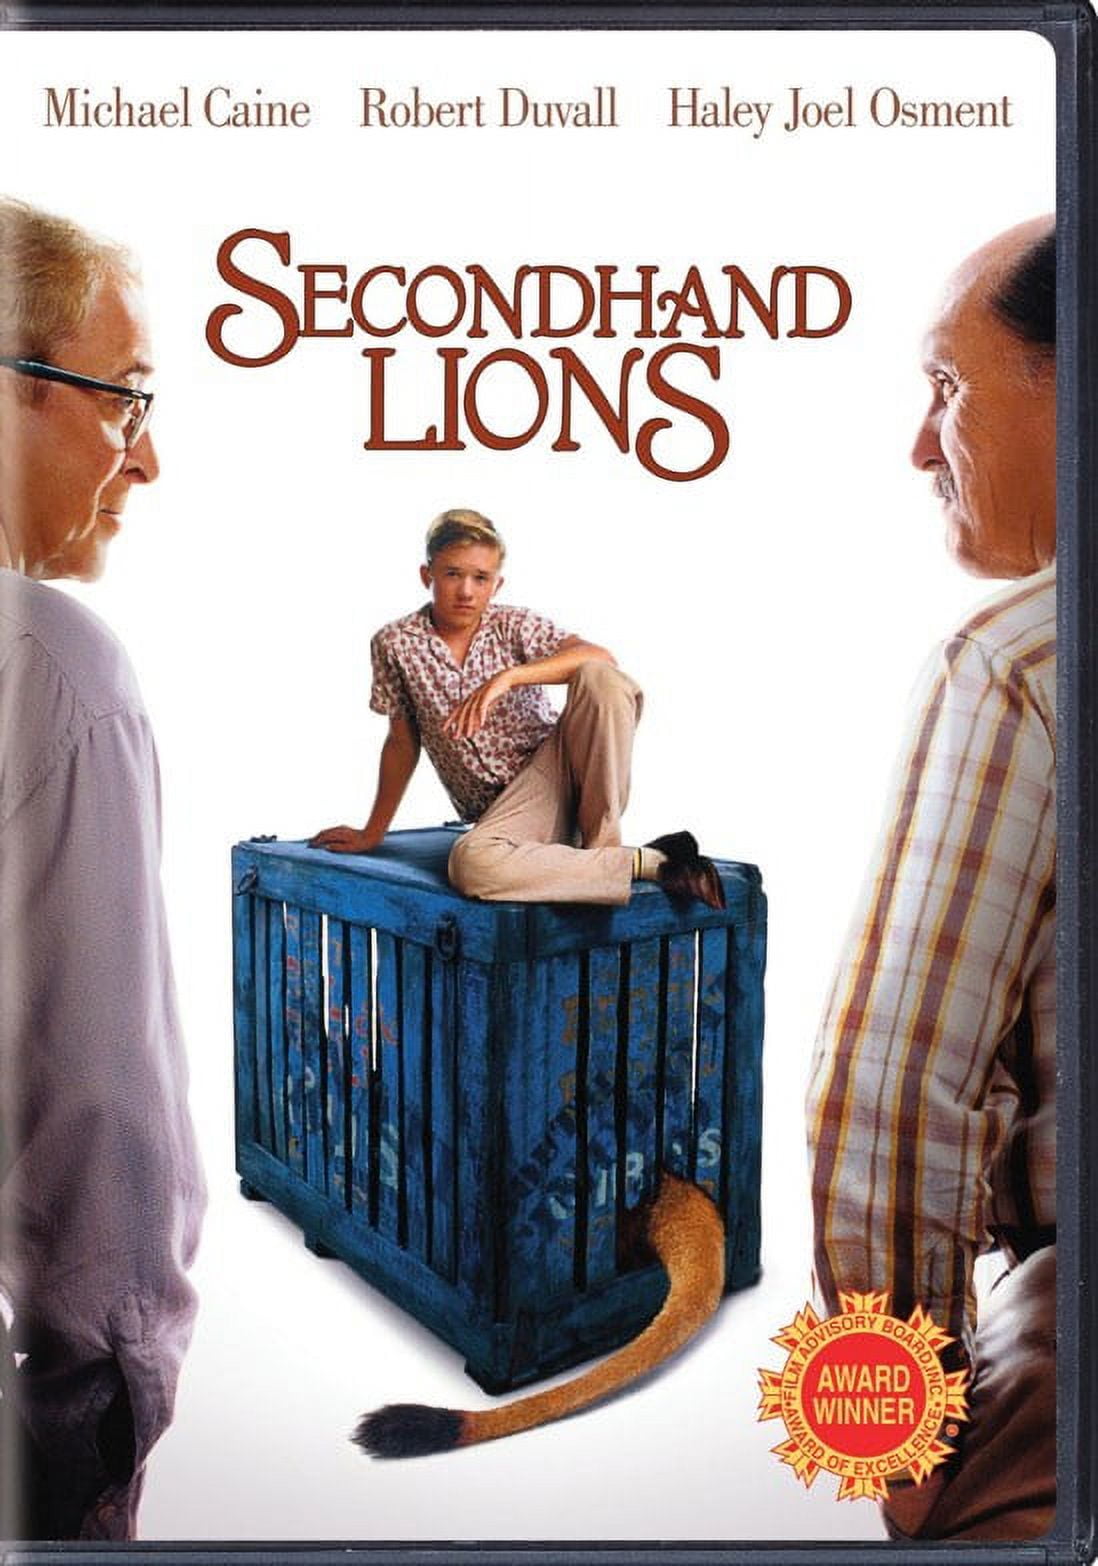 Friday Fundamentals in Film: Secondhand Lions